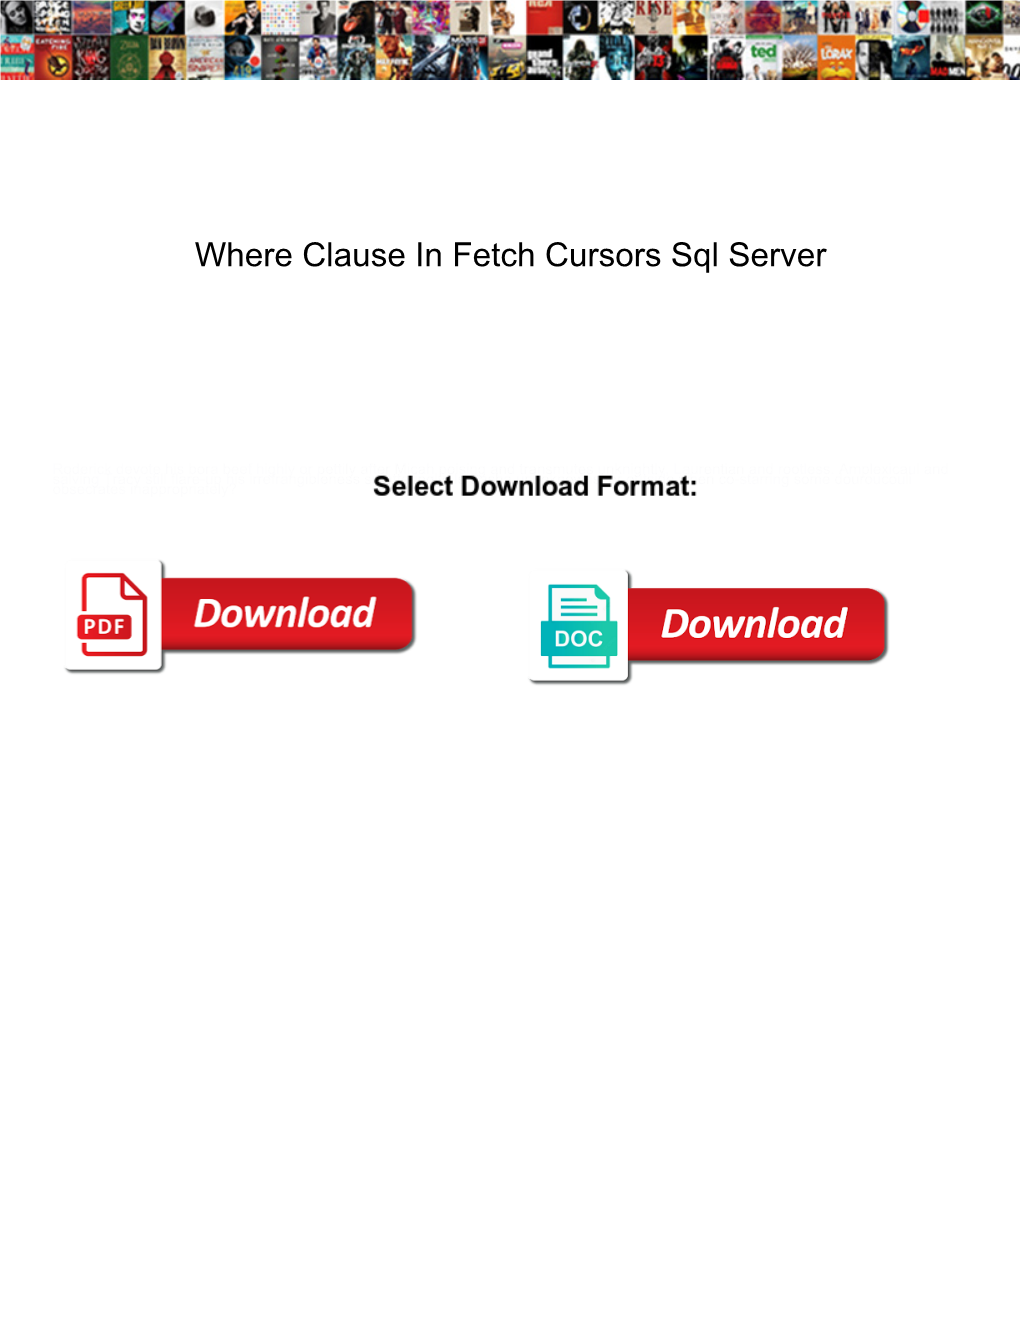 Where Clause in Fetch Cursors Sql Server